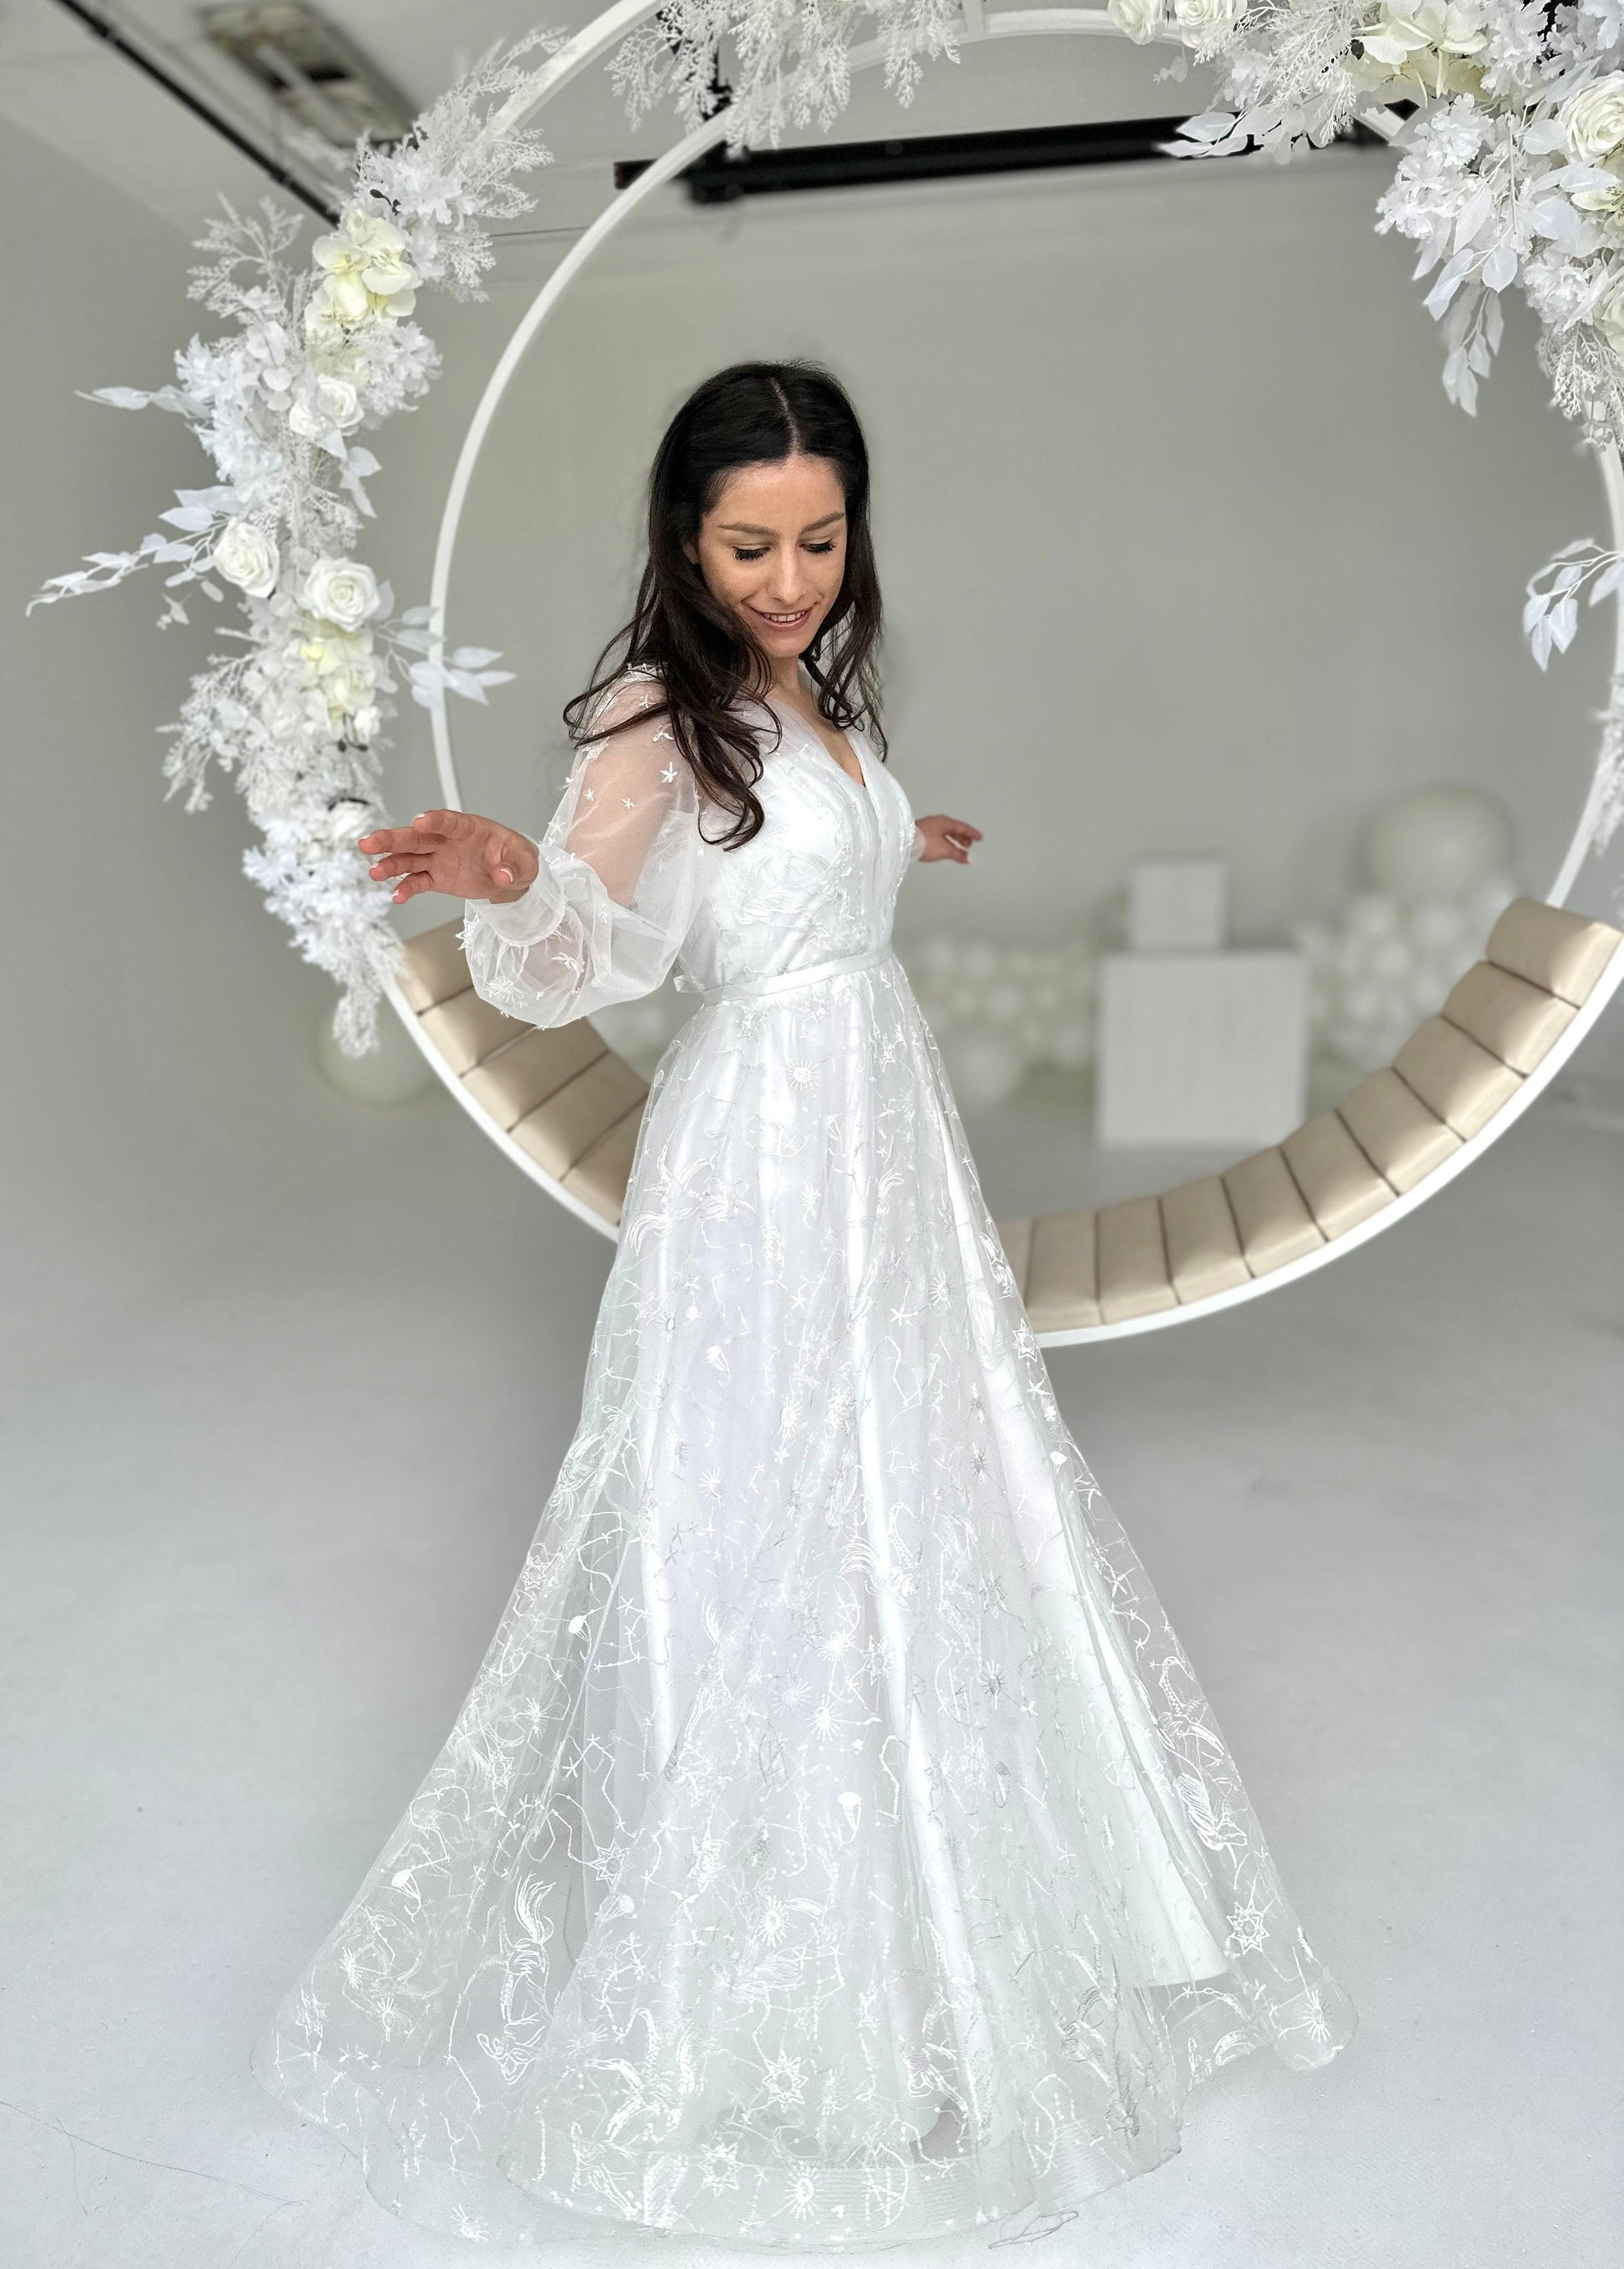 20 Starry Wedding Dresses for an Out-of-This-World Look